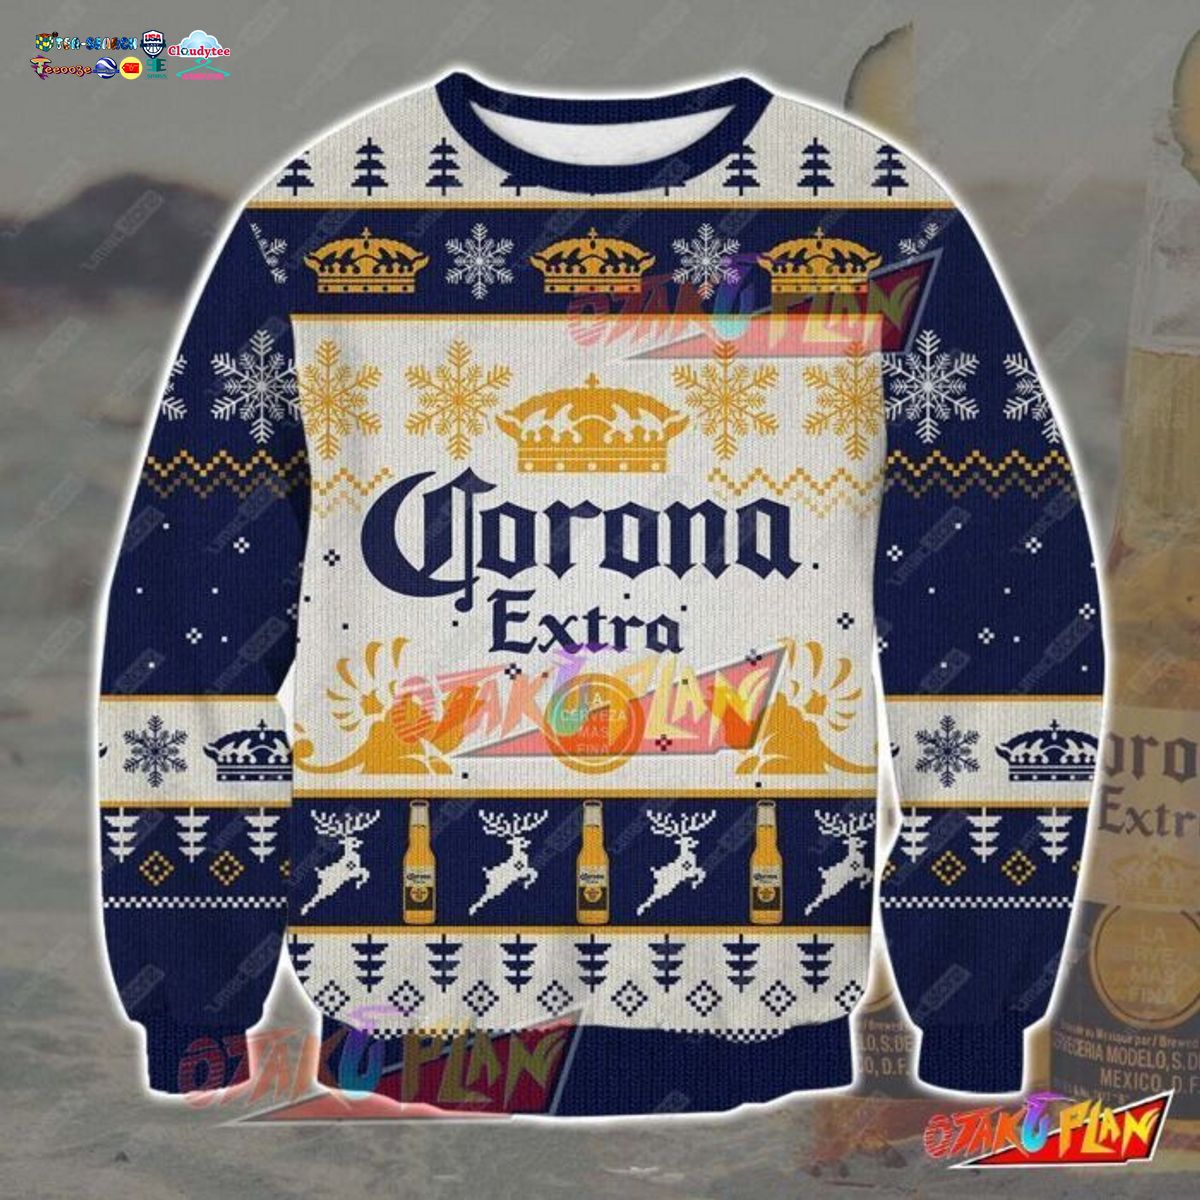 Corona Extra Ver 1 Ugly Christmas Sweater - Have you joined a gymnasium?